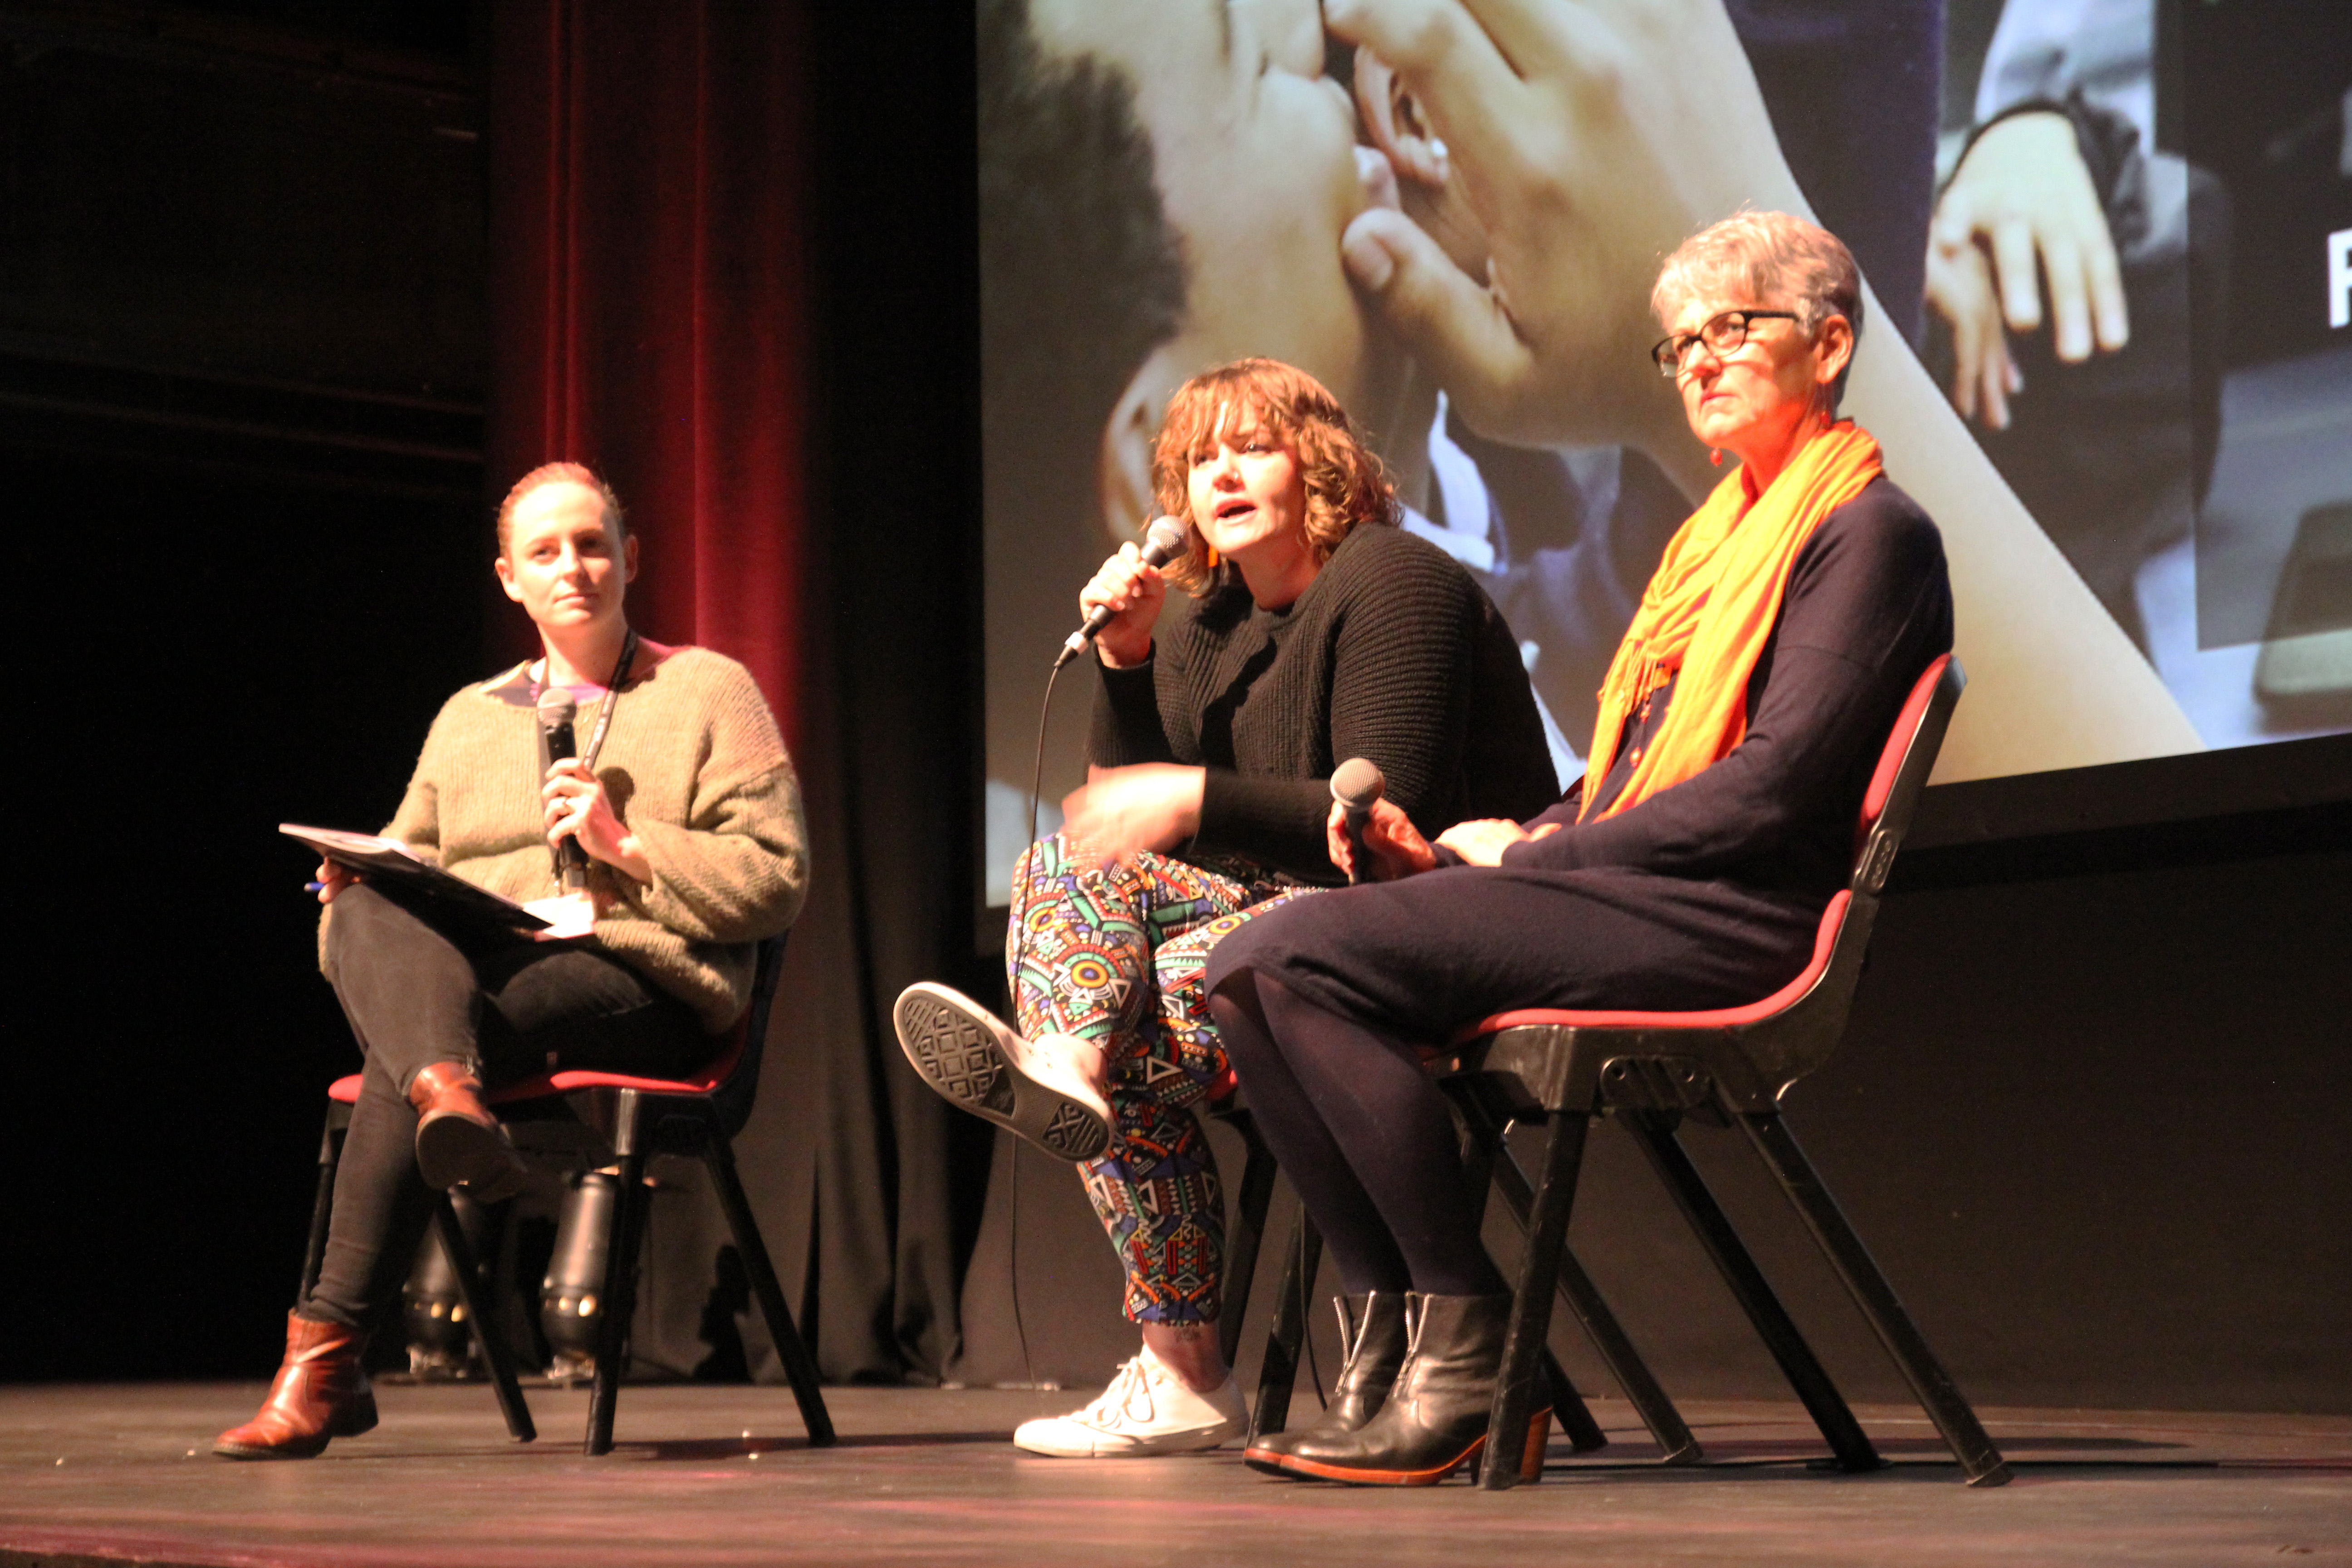 Slider Image Rosie Brown and Kerry Clancy (centre and right) of the Tupu Ora Eating Disorders Clinic in a question and answer session facilitated by Doc Edge's Jess Keogh, at the screening of I am Maris, a documentary about a teenage girl who overcomes an eating disorder.